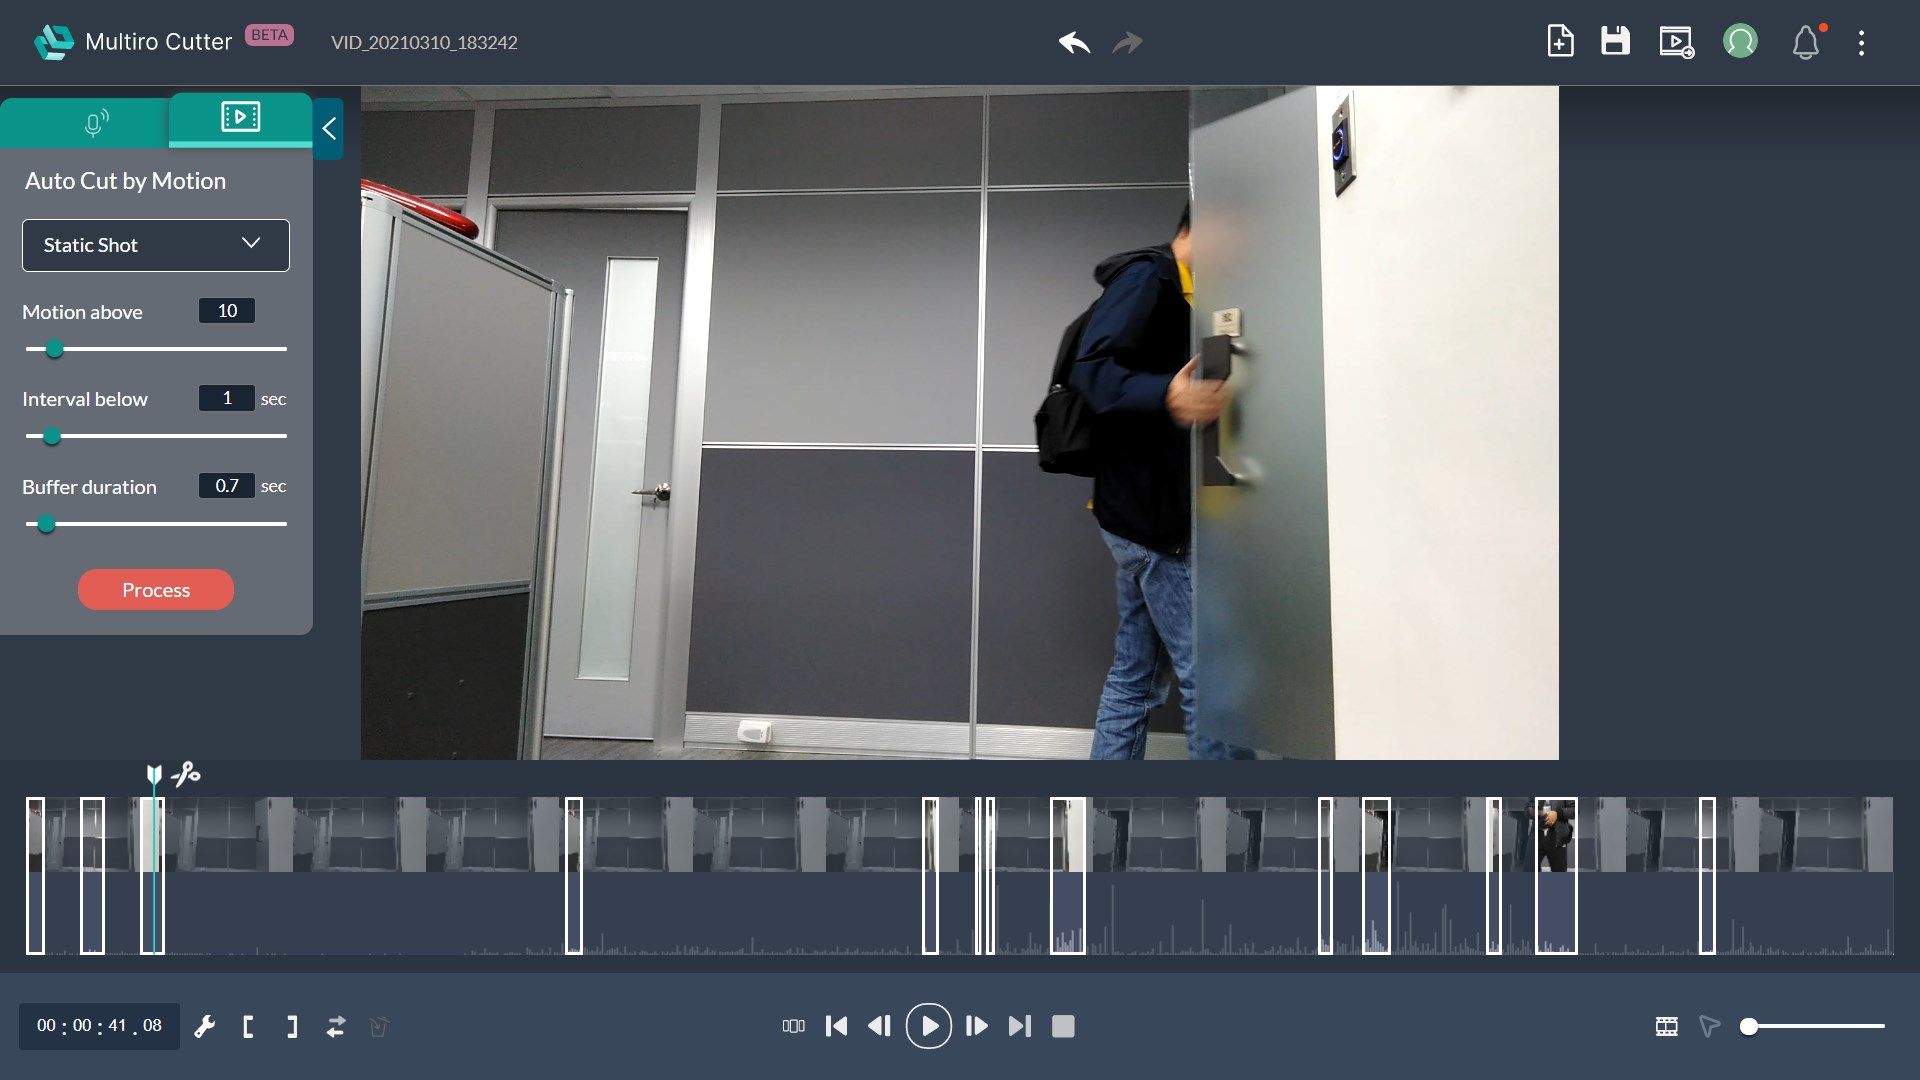 Automatically mark the scenes with noticeable motions in a security monitoring video.